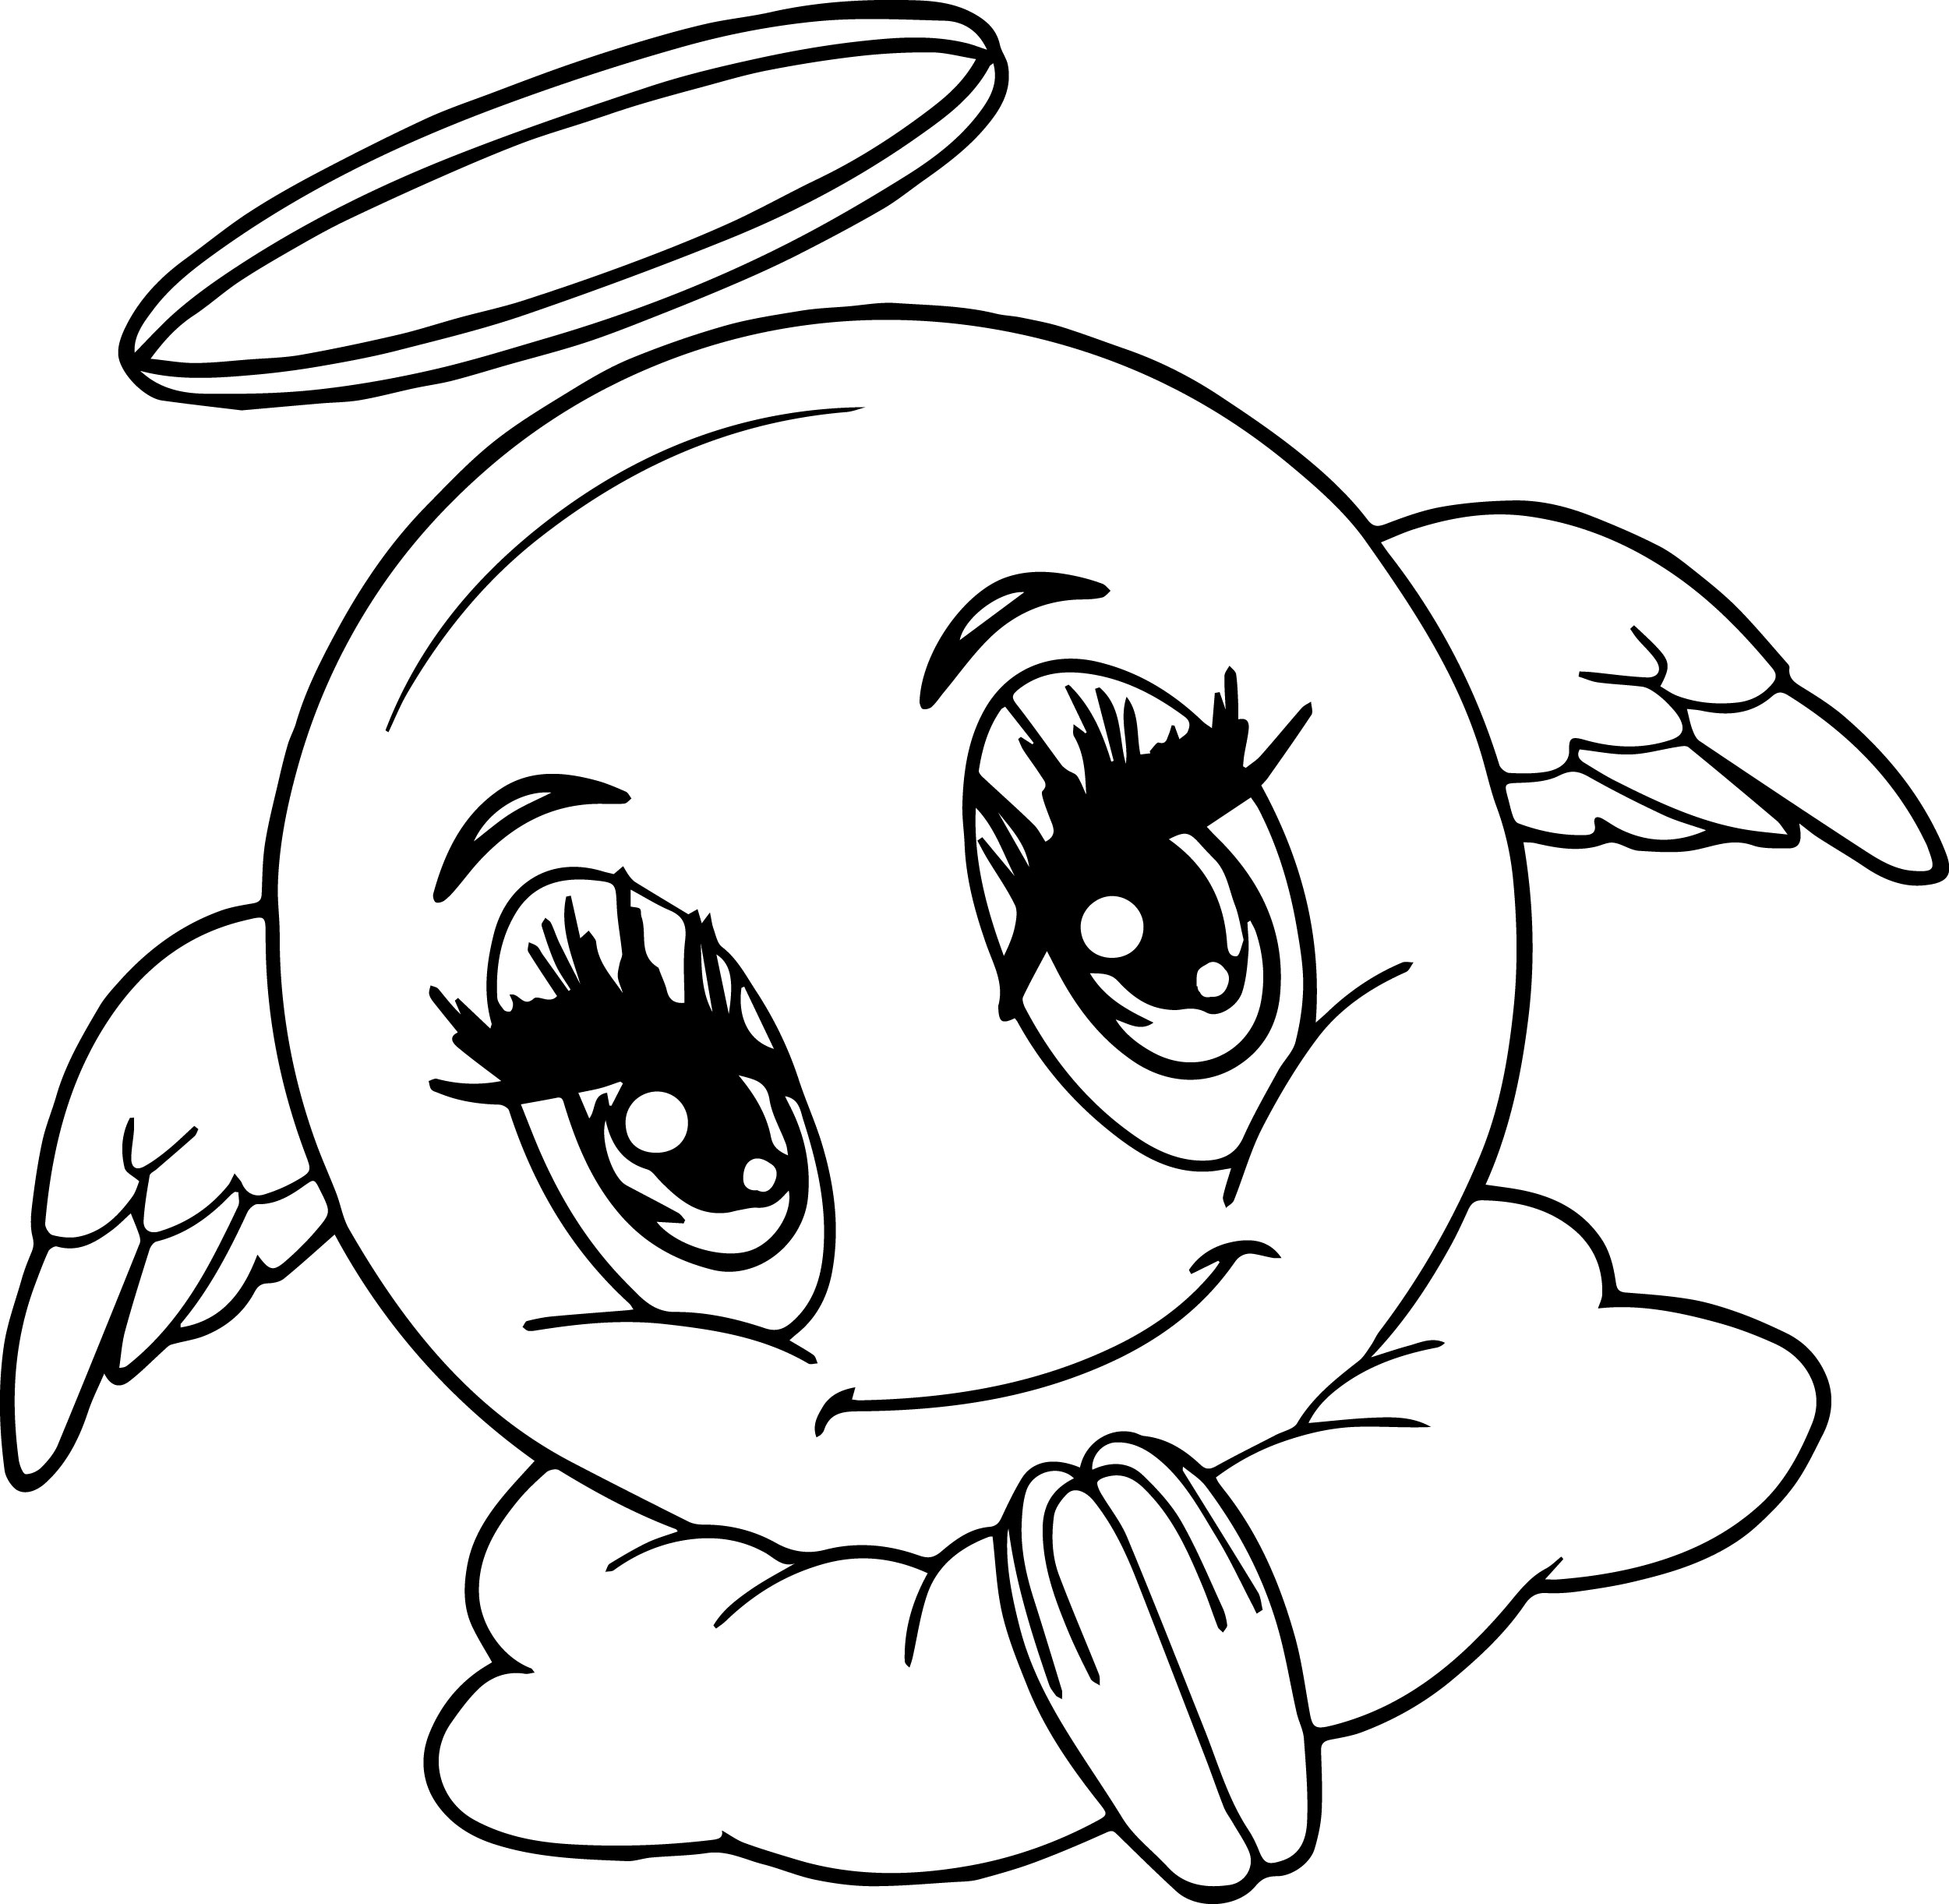 Emoji Coloring Pages Best Coloring Pages For Kids